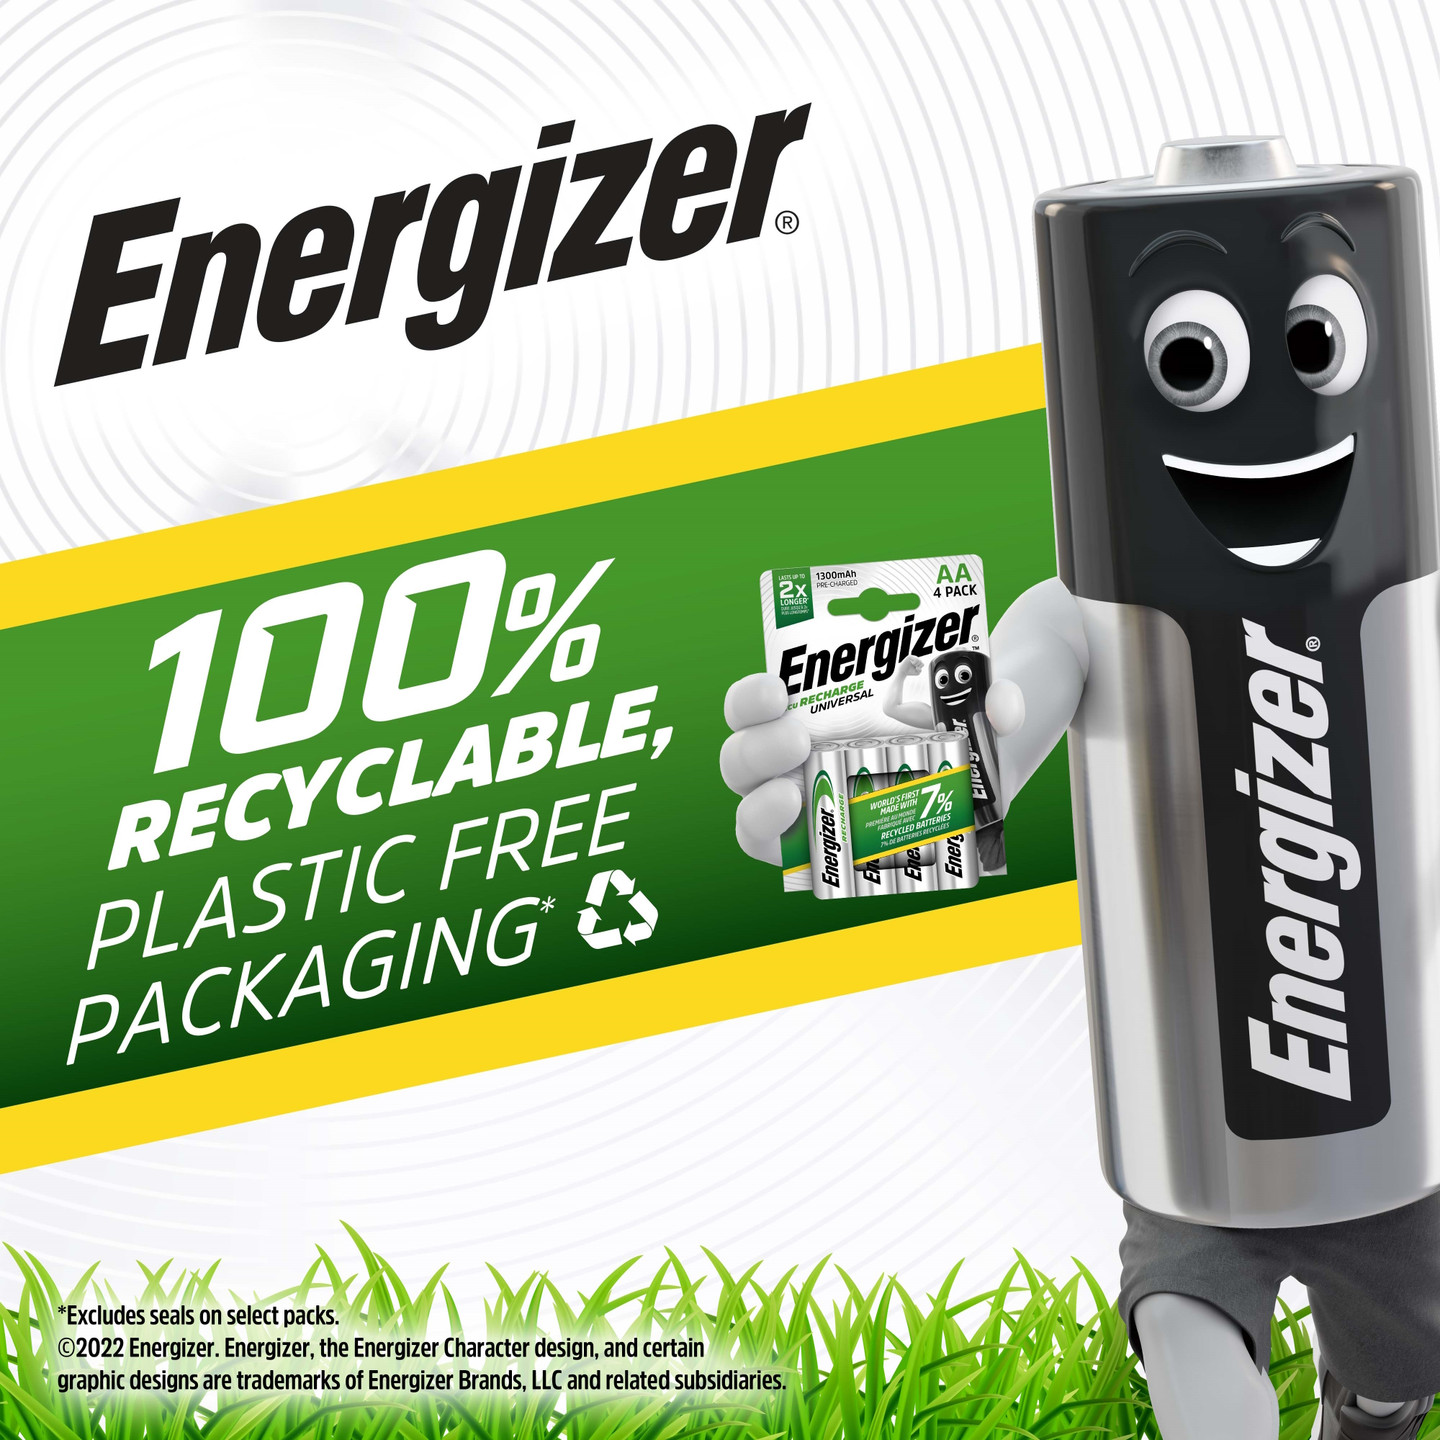 Energizer Universal AA 1300mAh Rechargeable Batteries (4 Pack)